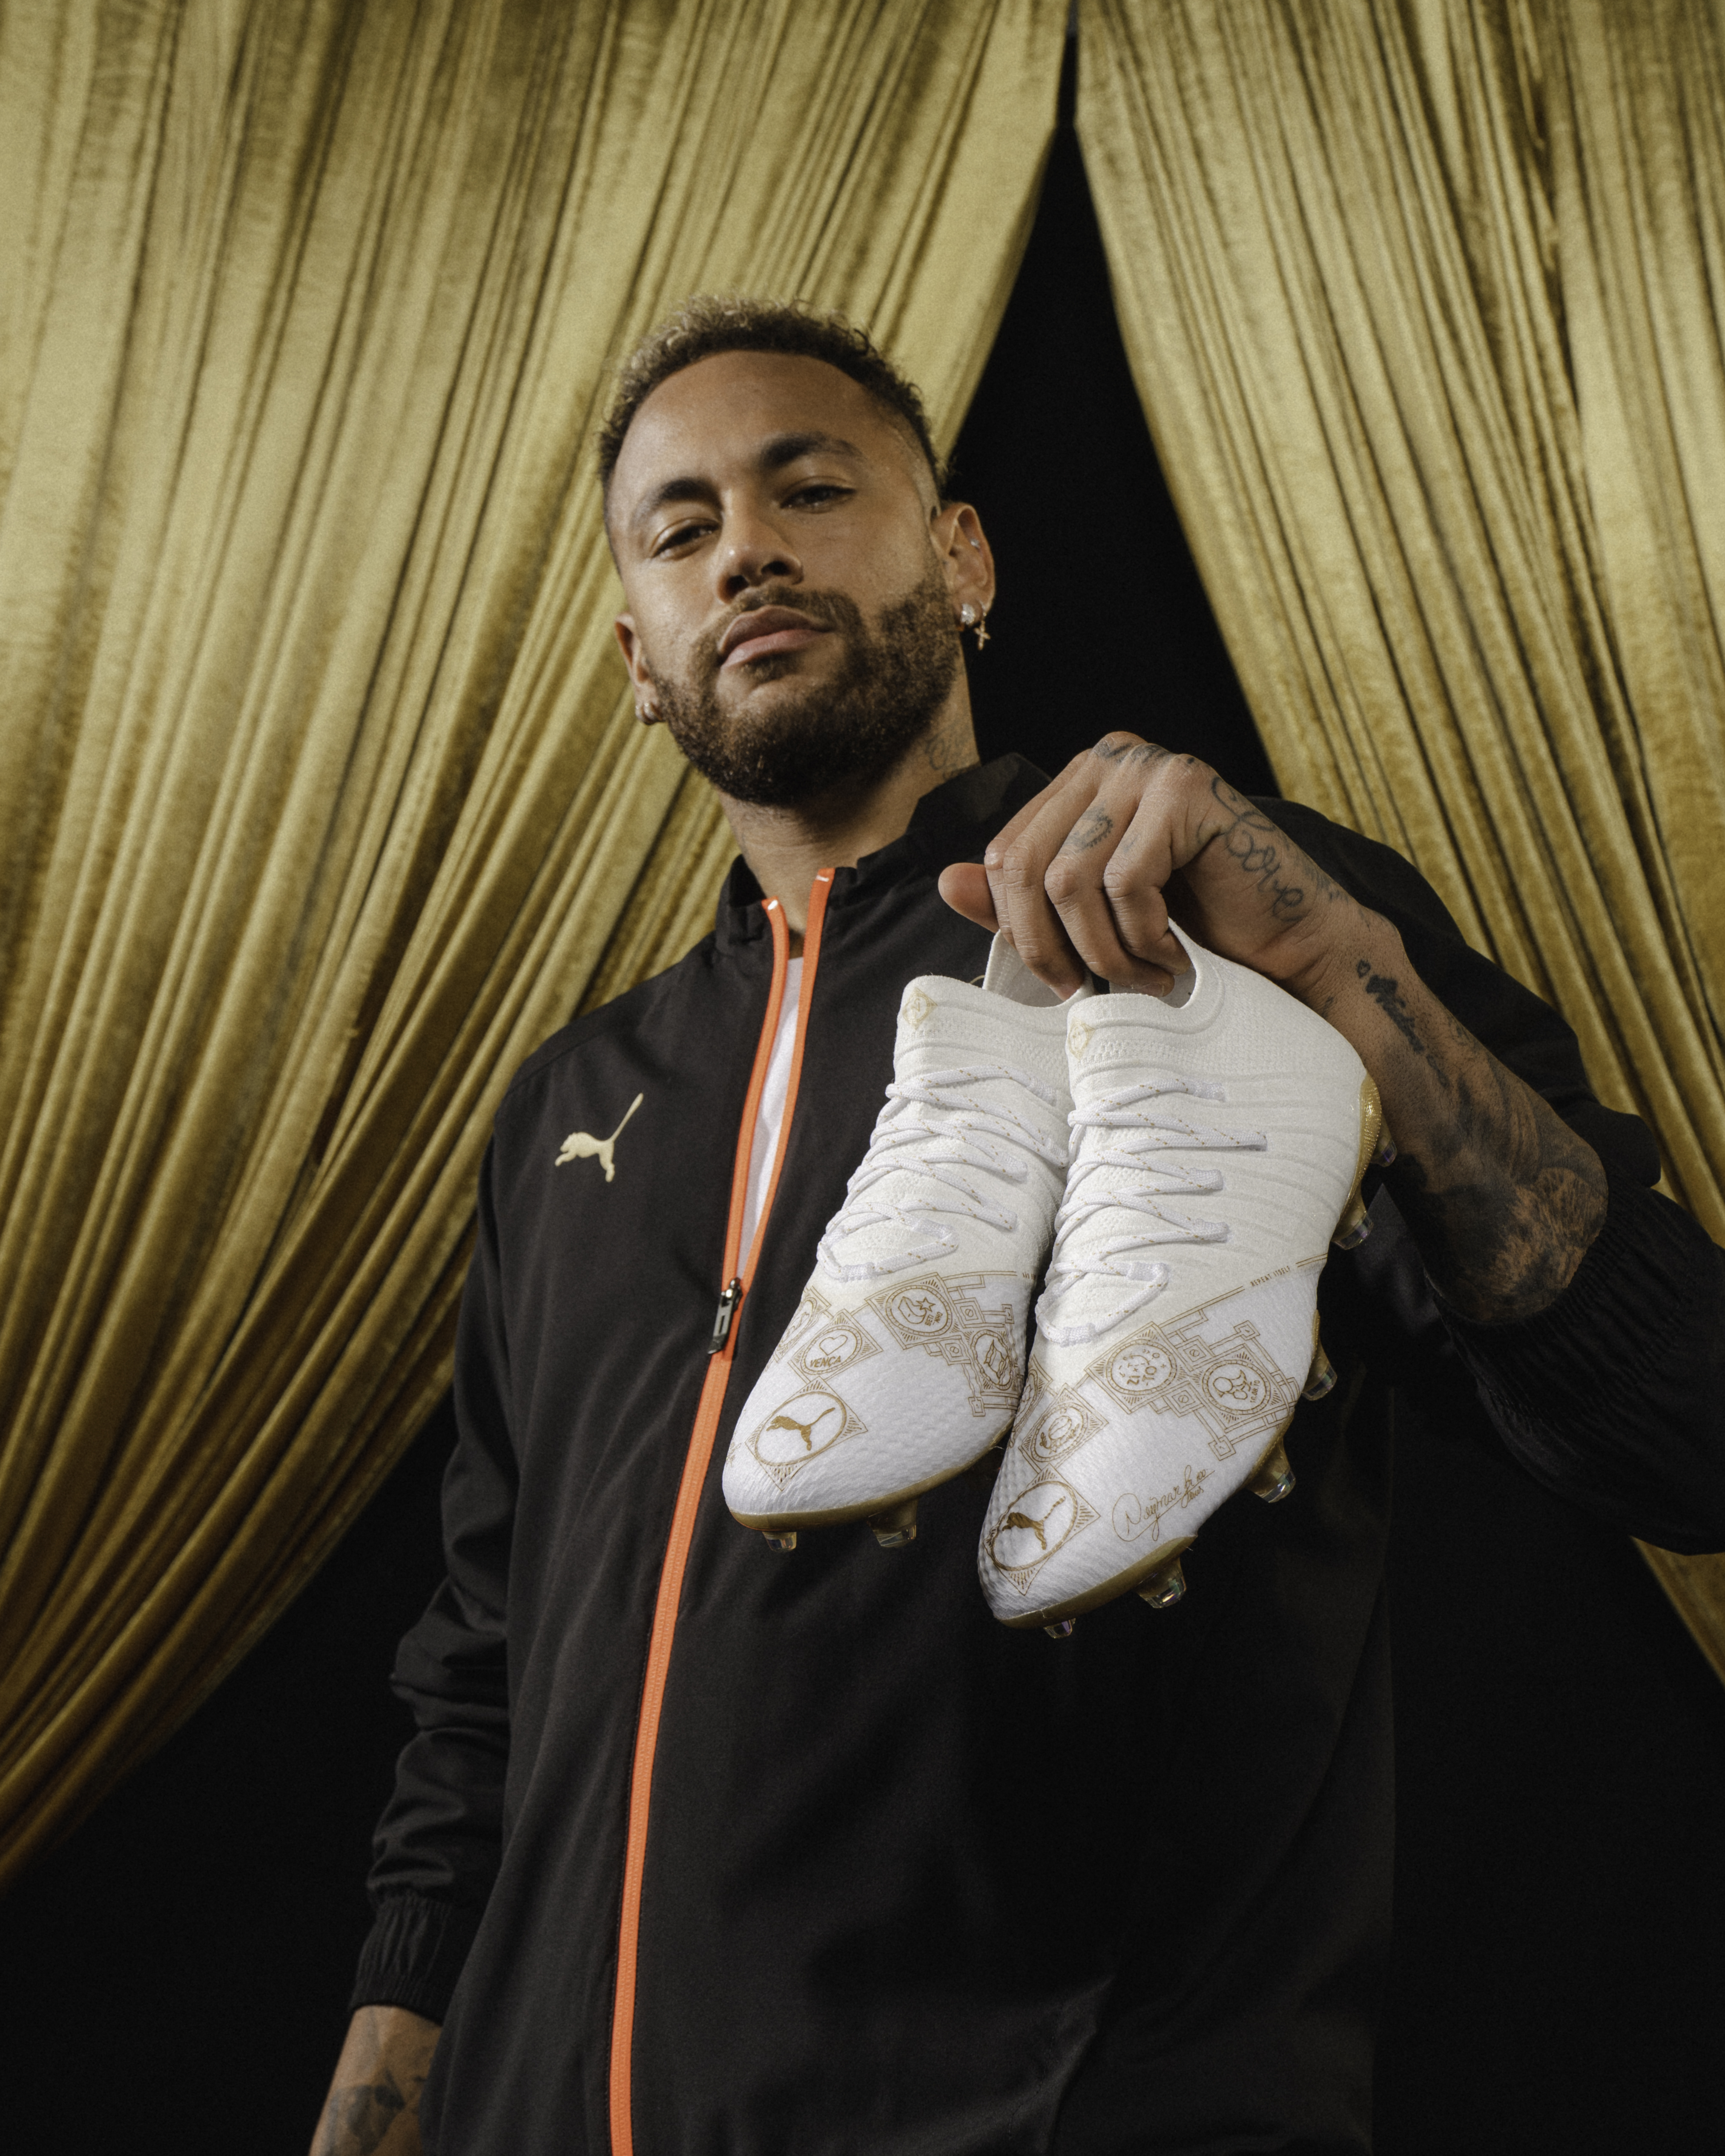 PUMA AND NEYMAR JR. GIFT NJR78 FUTURE BOOTS TO 78 PEOPLE WHO HAVE HELPED  HIM TO BREAK BRAZIL'S GOALSCORING RECORD